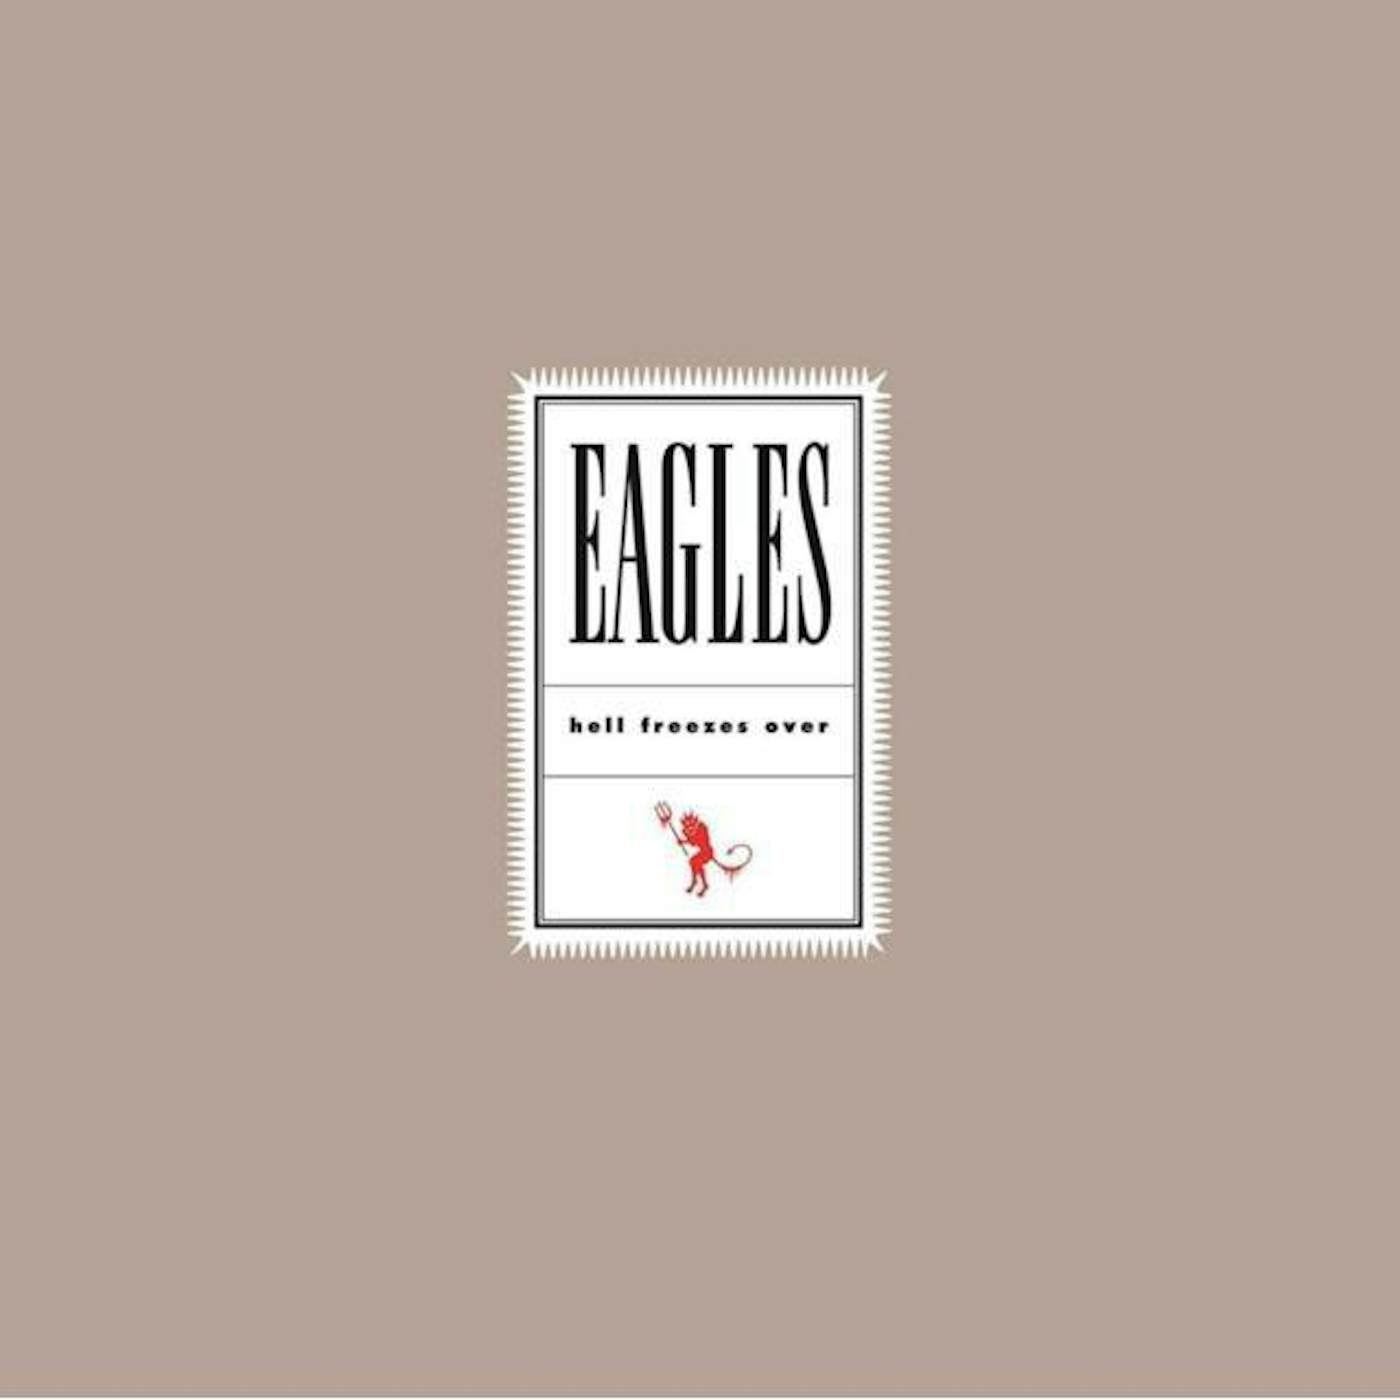 Eagles LP Vinyl Record - Hell Freezes Over (25th Anniversary Reissue)